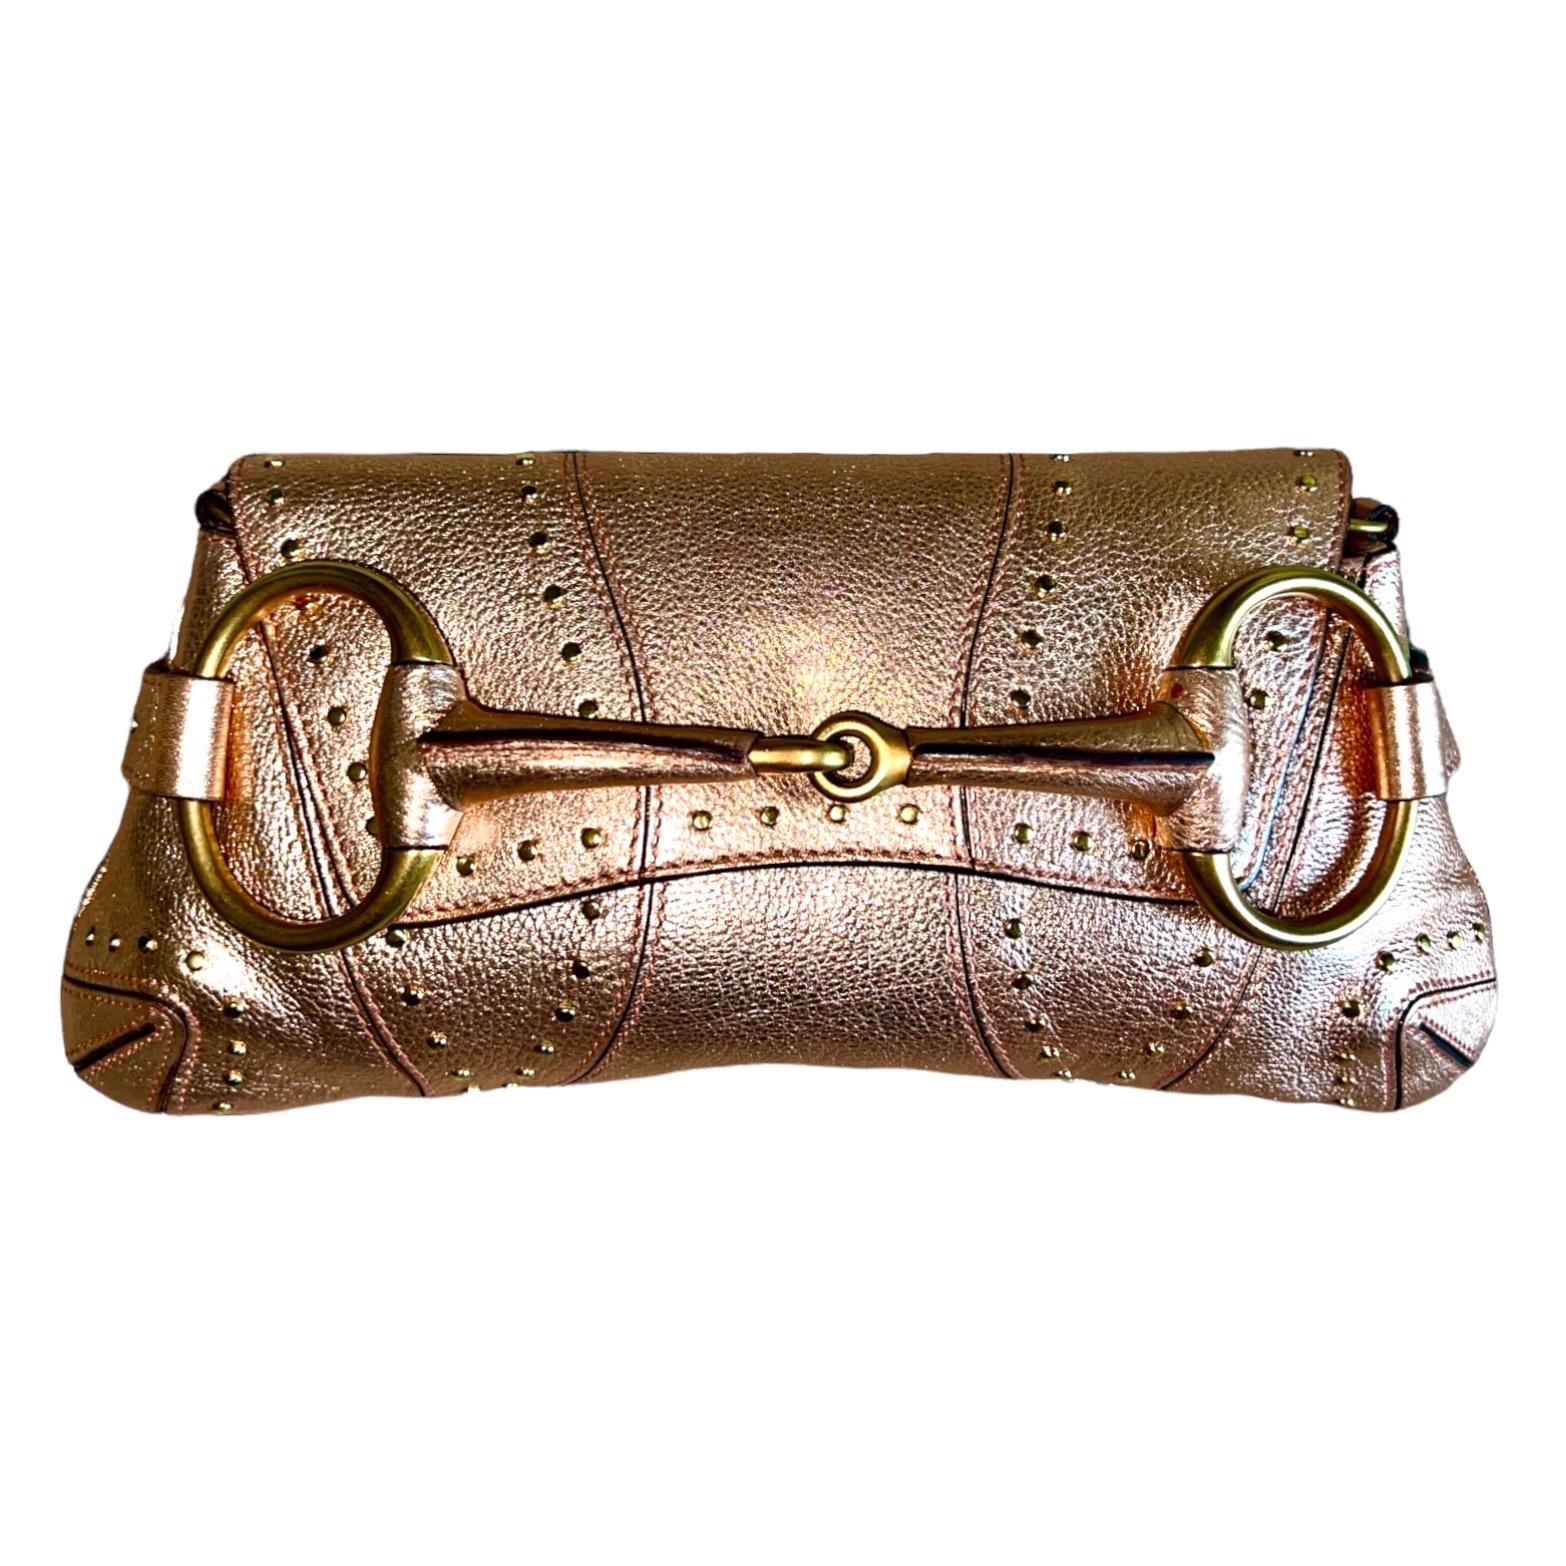 Gucci By Tom Ford FW 2003 Metallic Pink Barbiecore Studded Horsebit Clutch Bag 3